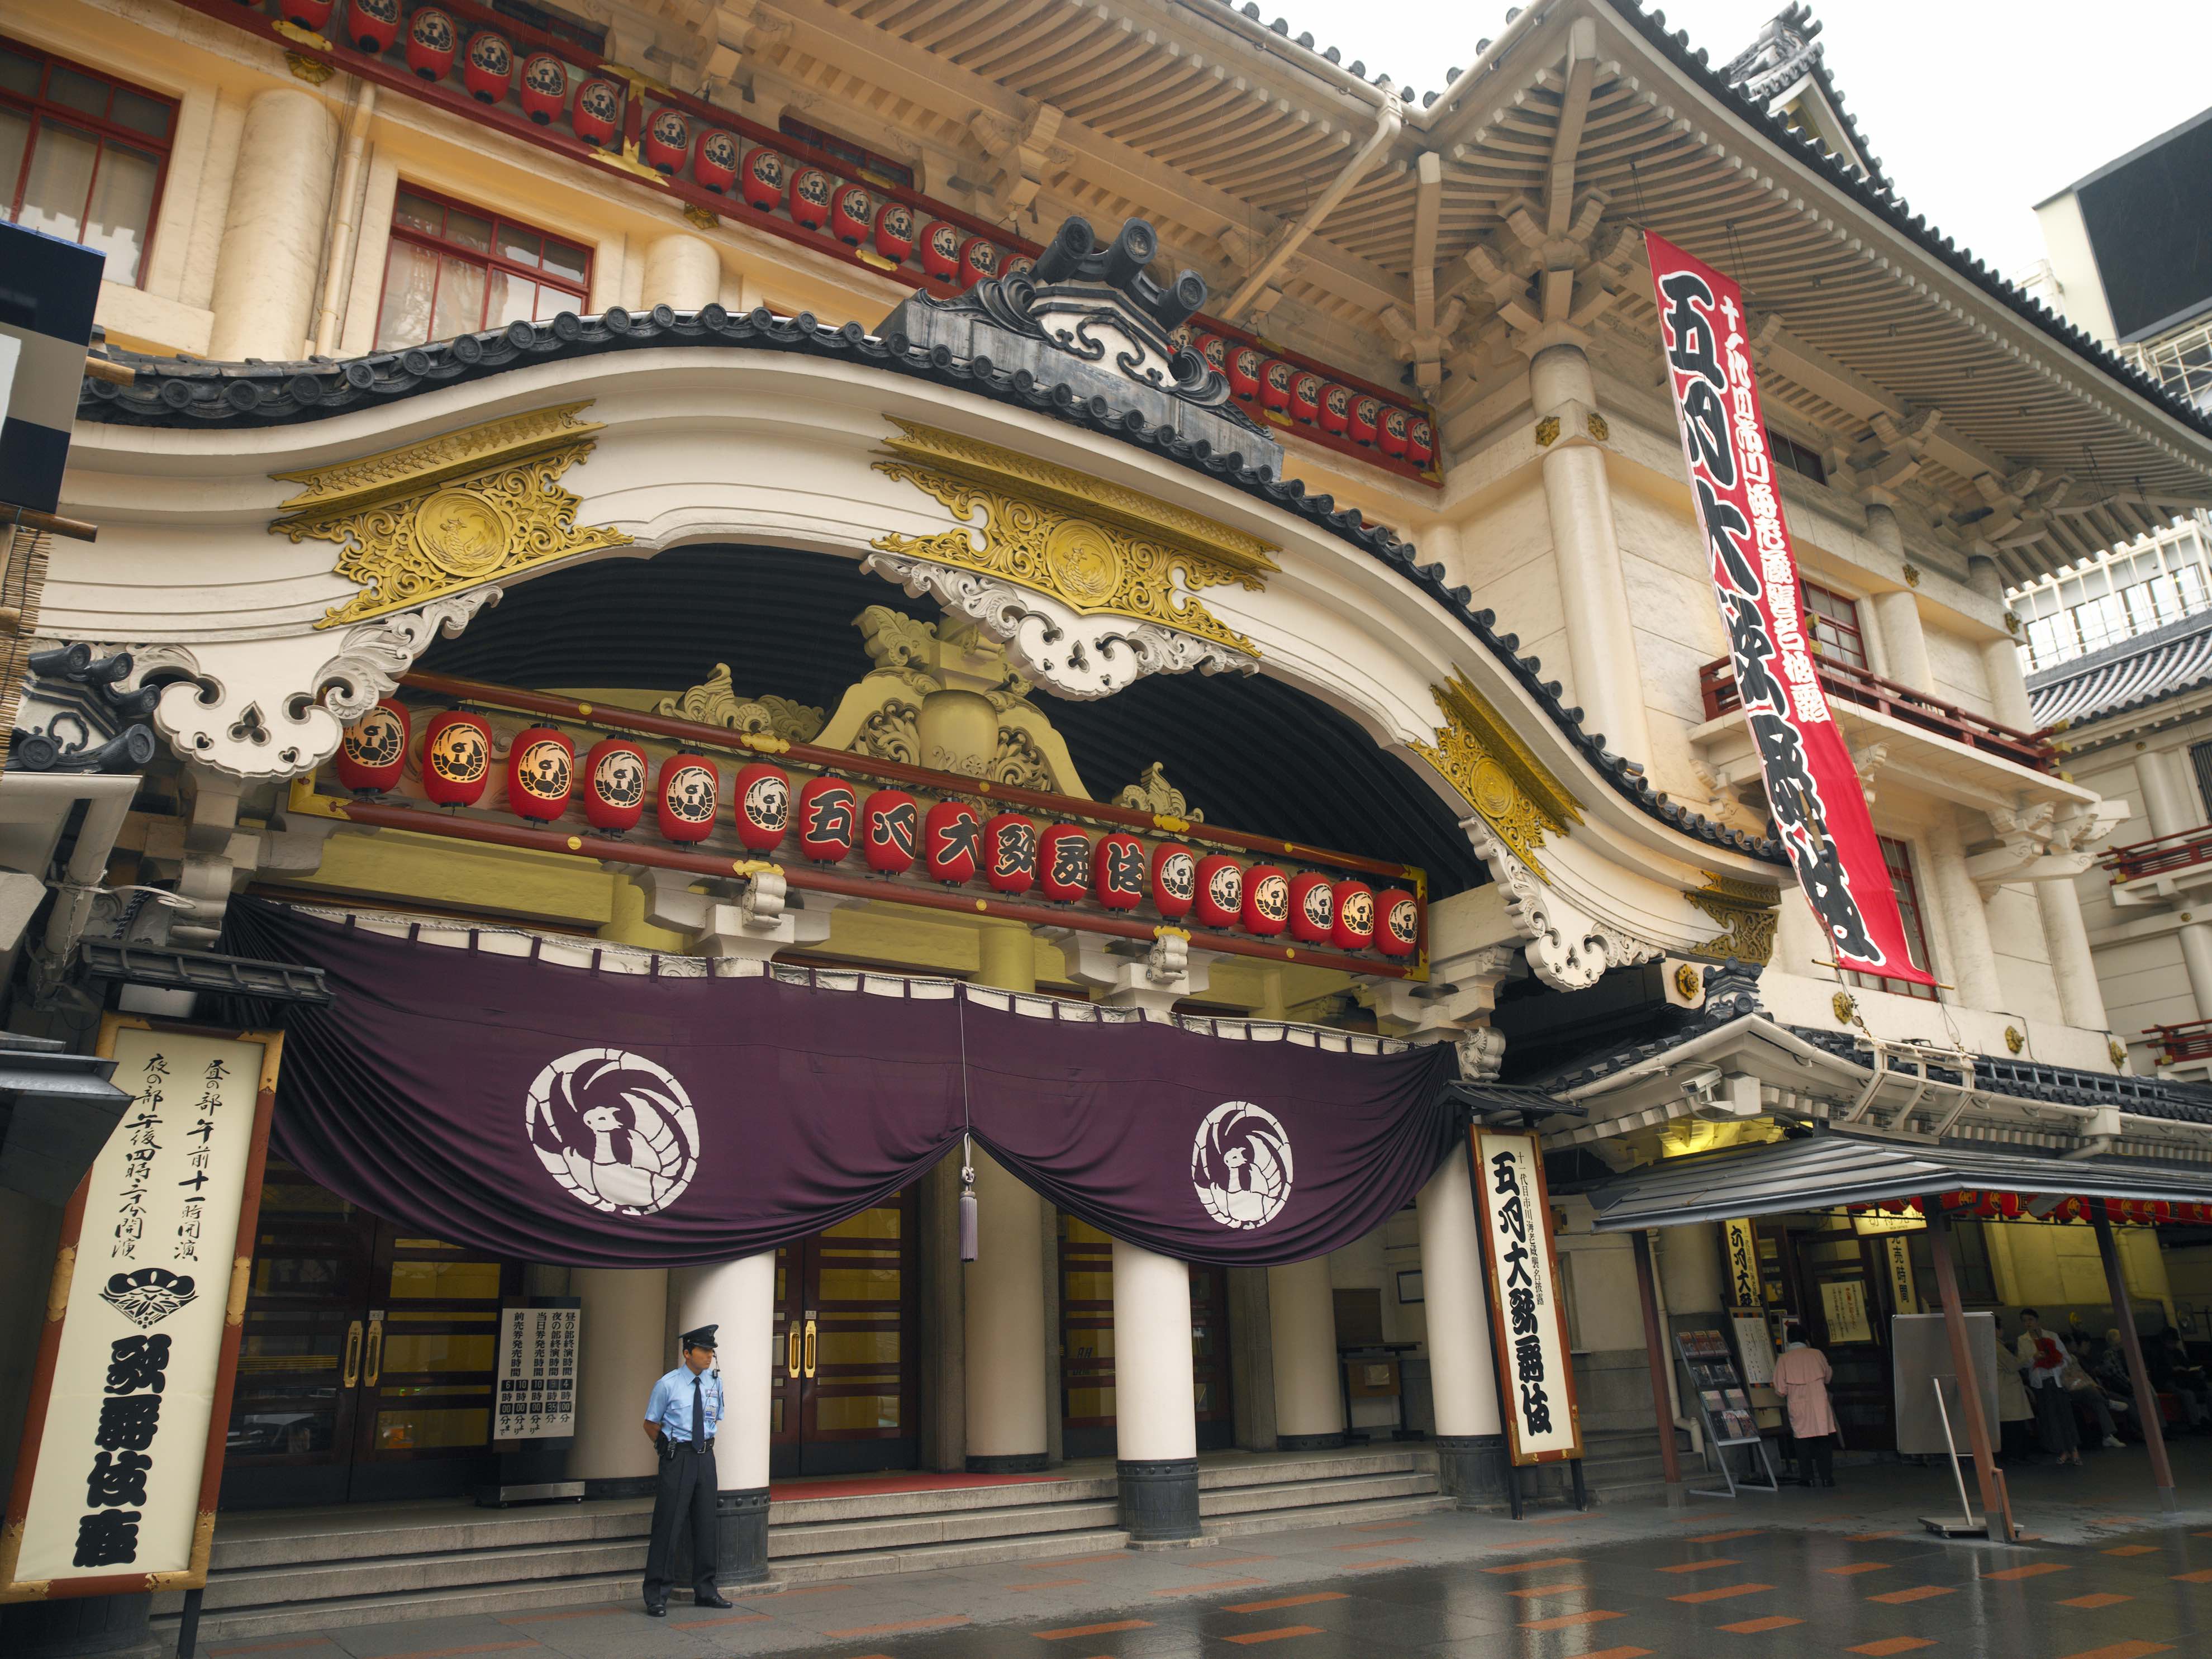 Tokyo, Japan - May 20, 2004: Exterior of the main entrance to the Kabukiza Theatre in the Ginza district of Tokyo in Japan, This is the principal theatre in Tokyo for the traditional kabuki form of stage drama.